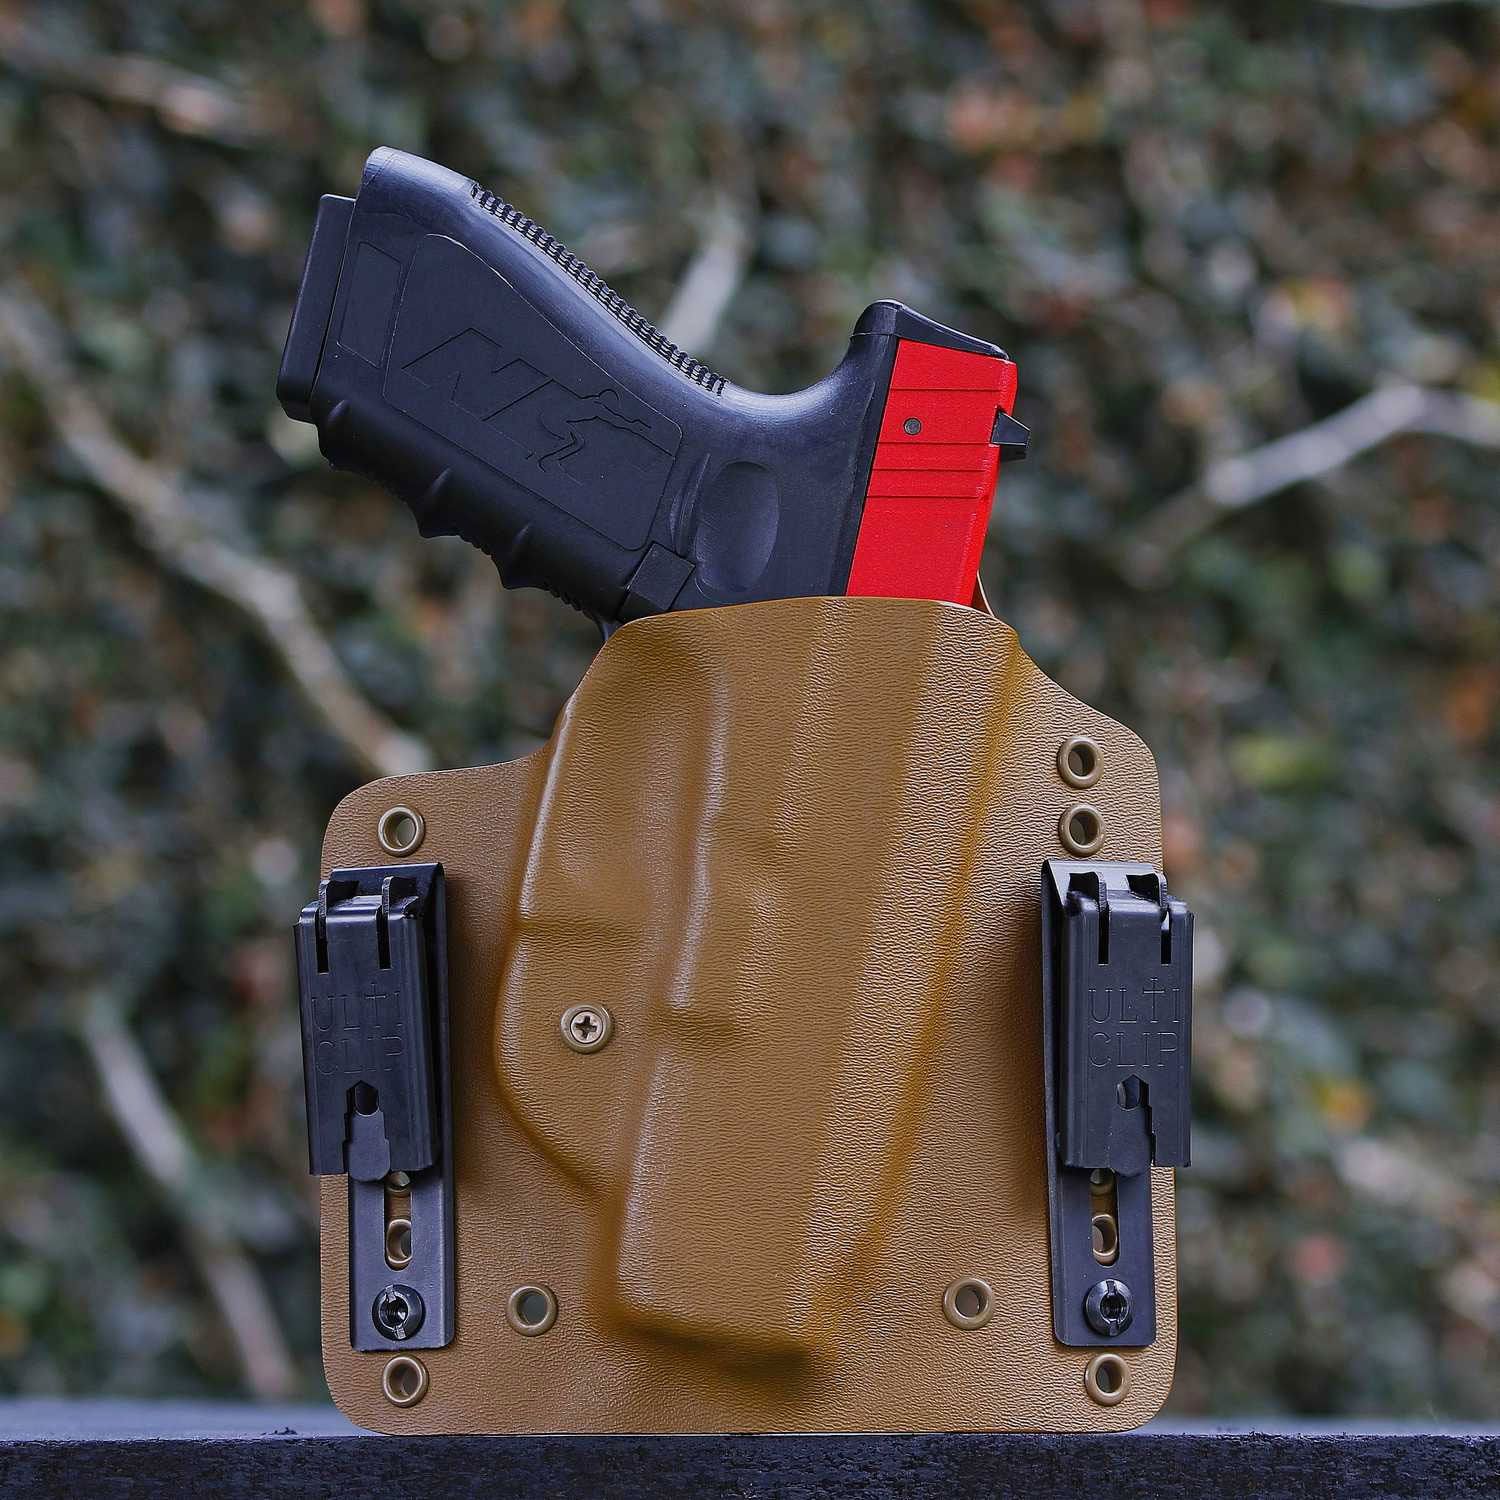 ULTICLIP XL Holster Clip for Belt Carry